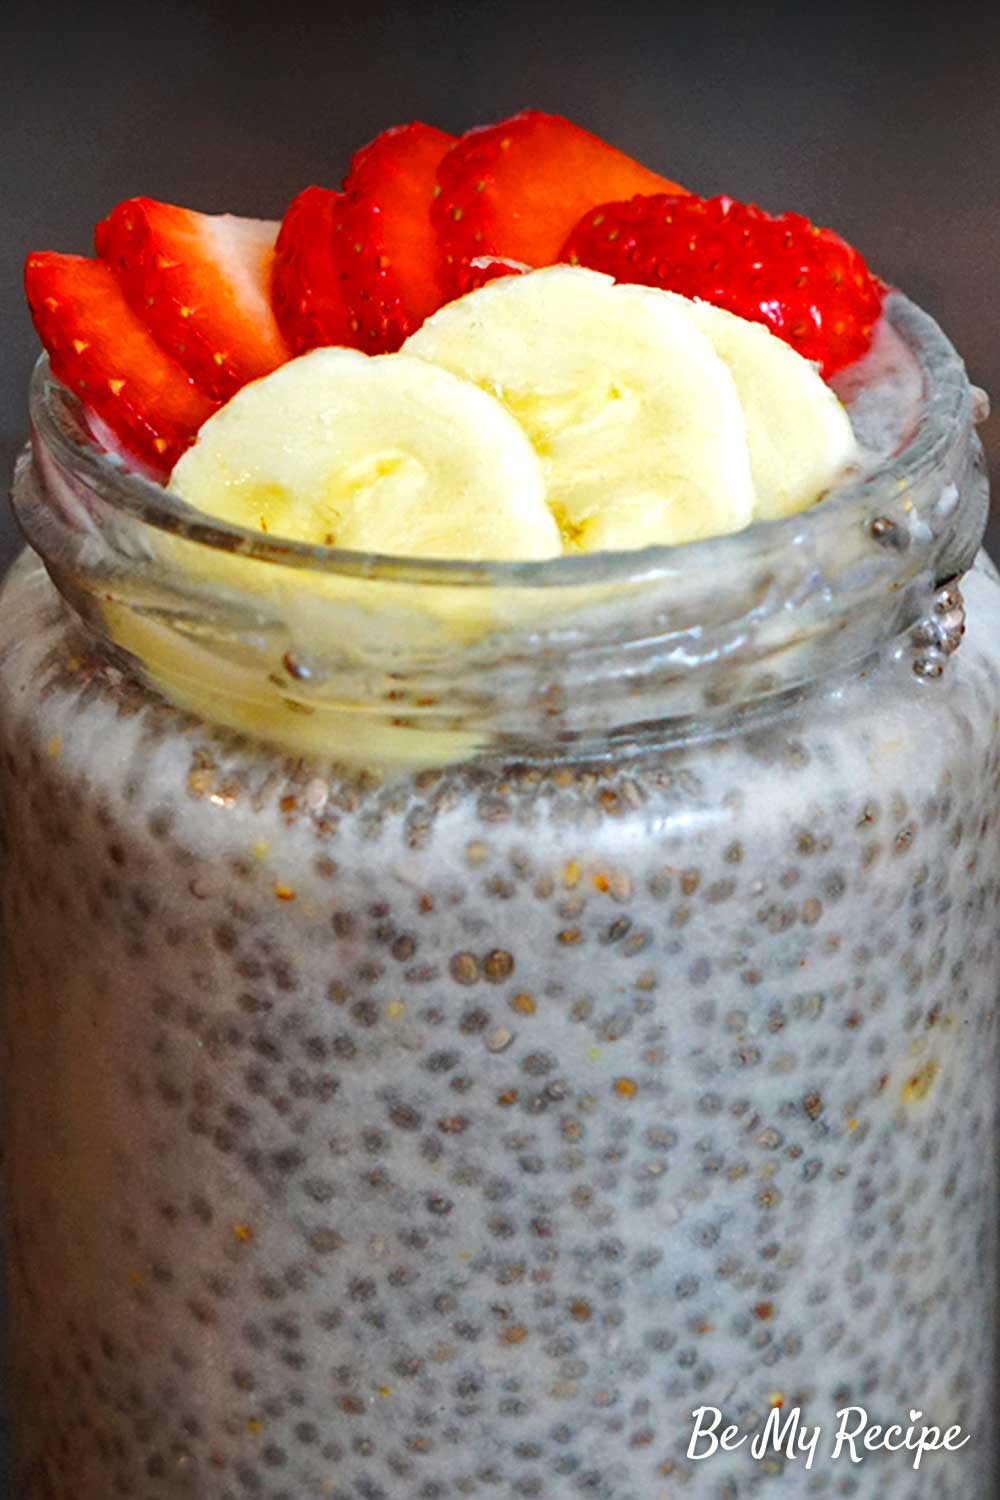 Strawberry Banana Chia Pudding Recipe for a Sweet, Fresh, and Delicious Snack